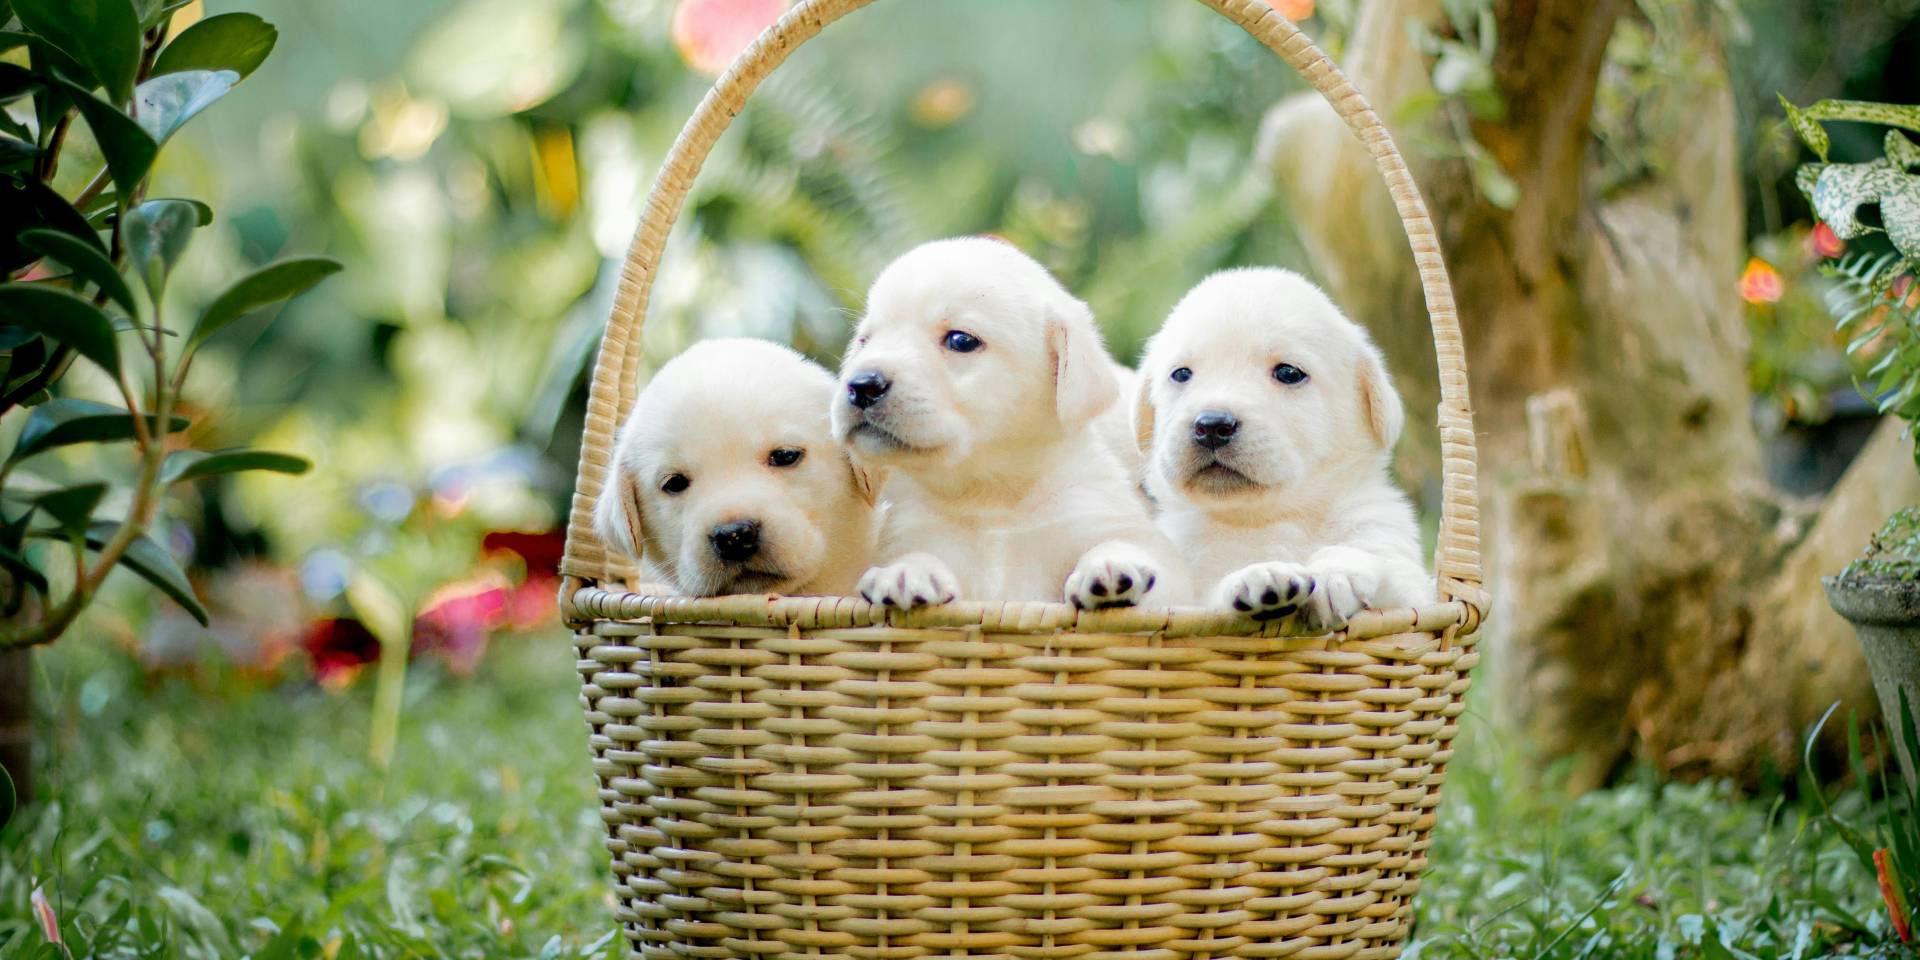 Three puppies in a basket on the grass.